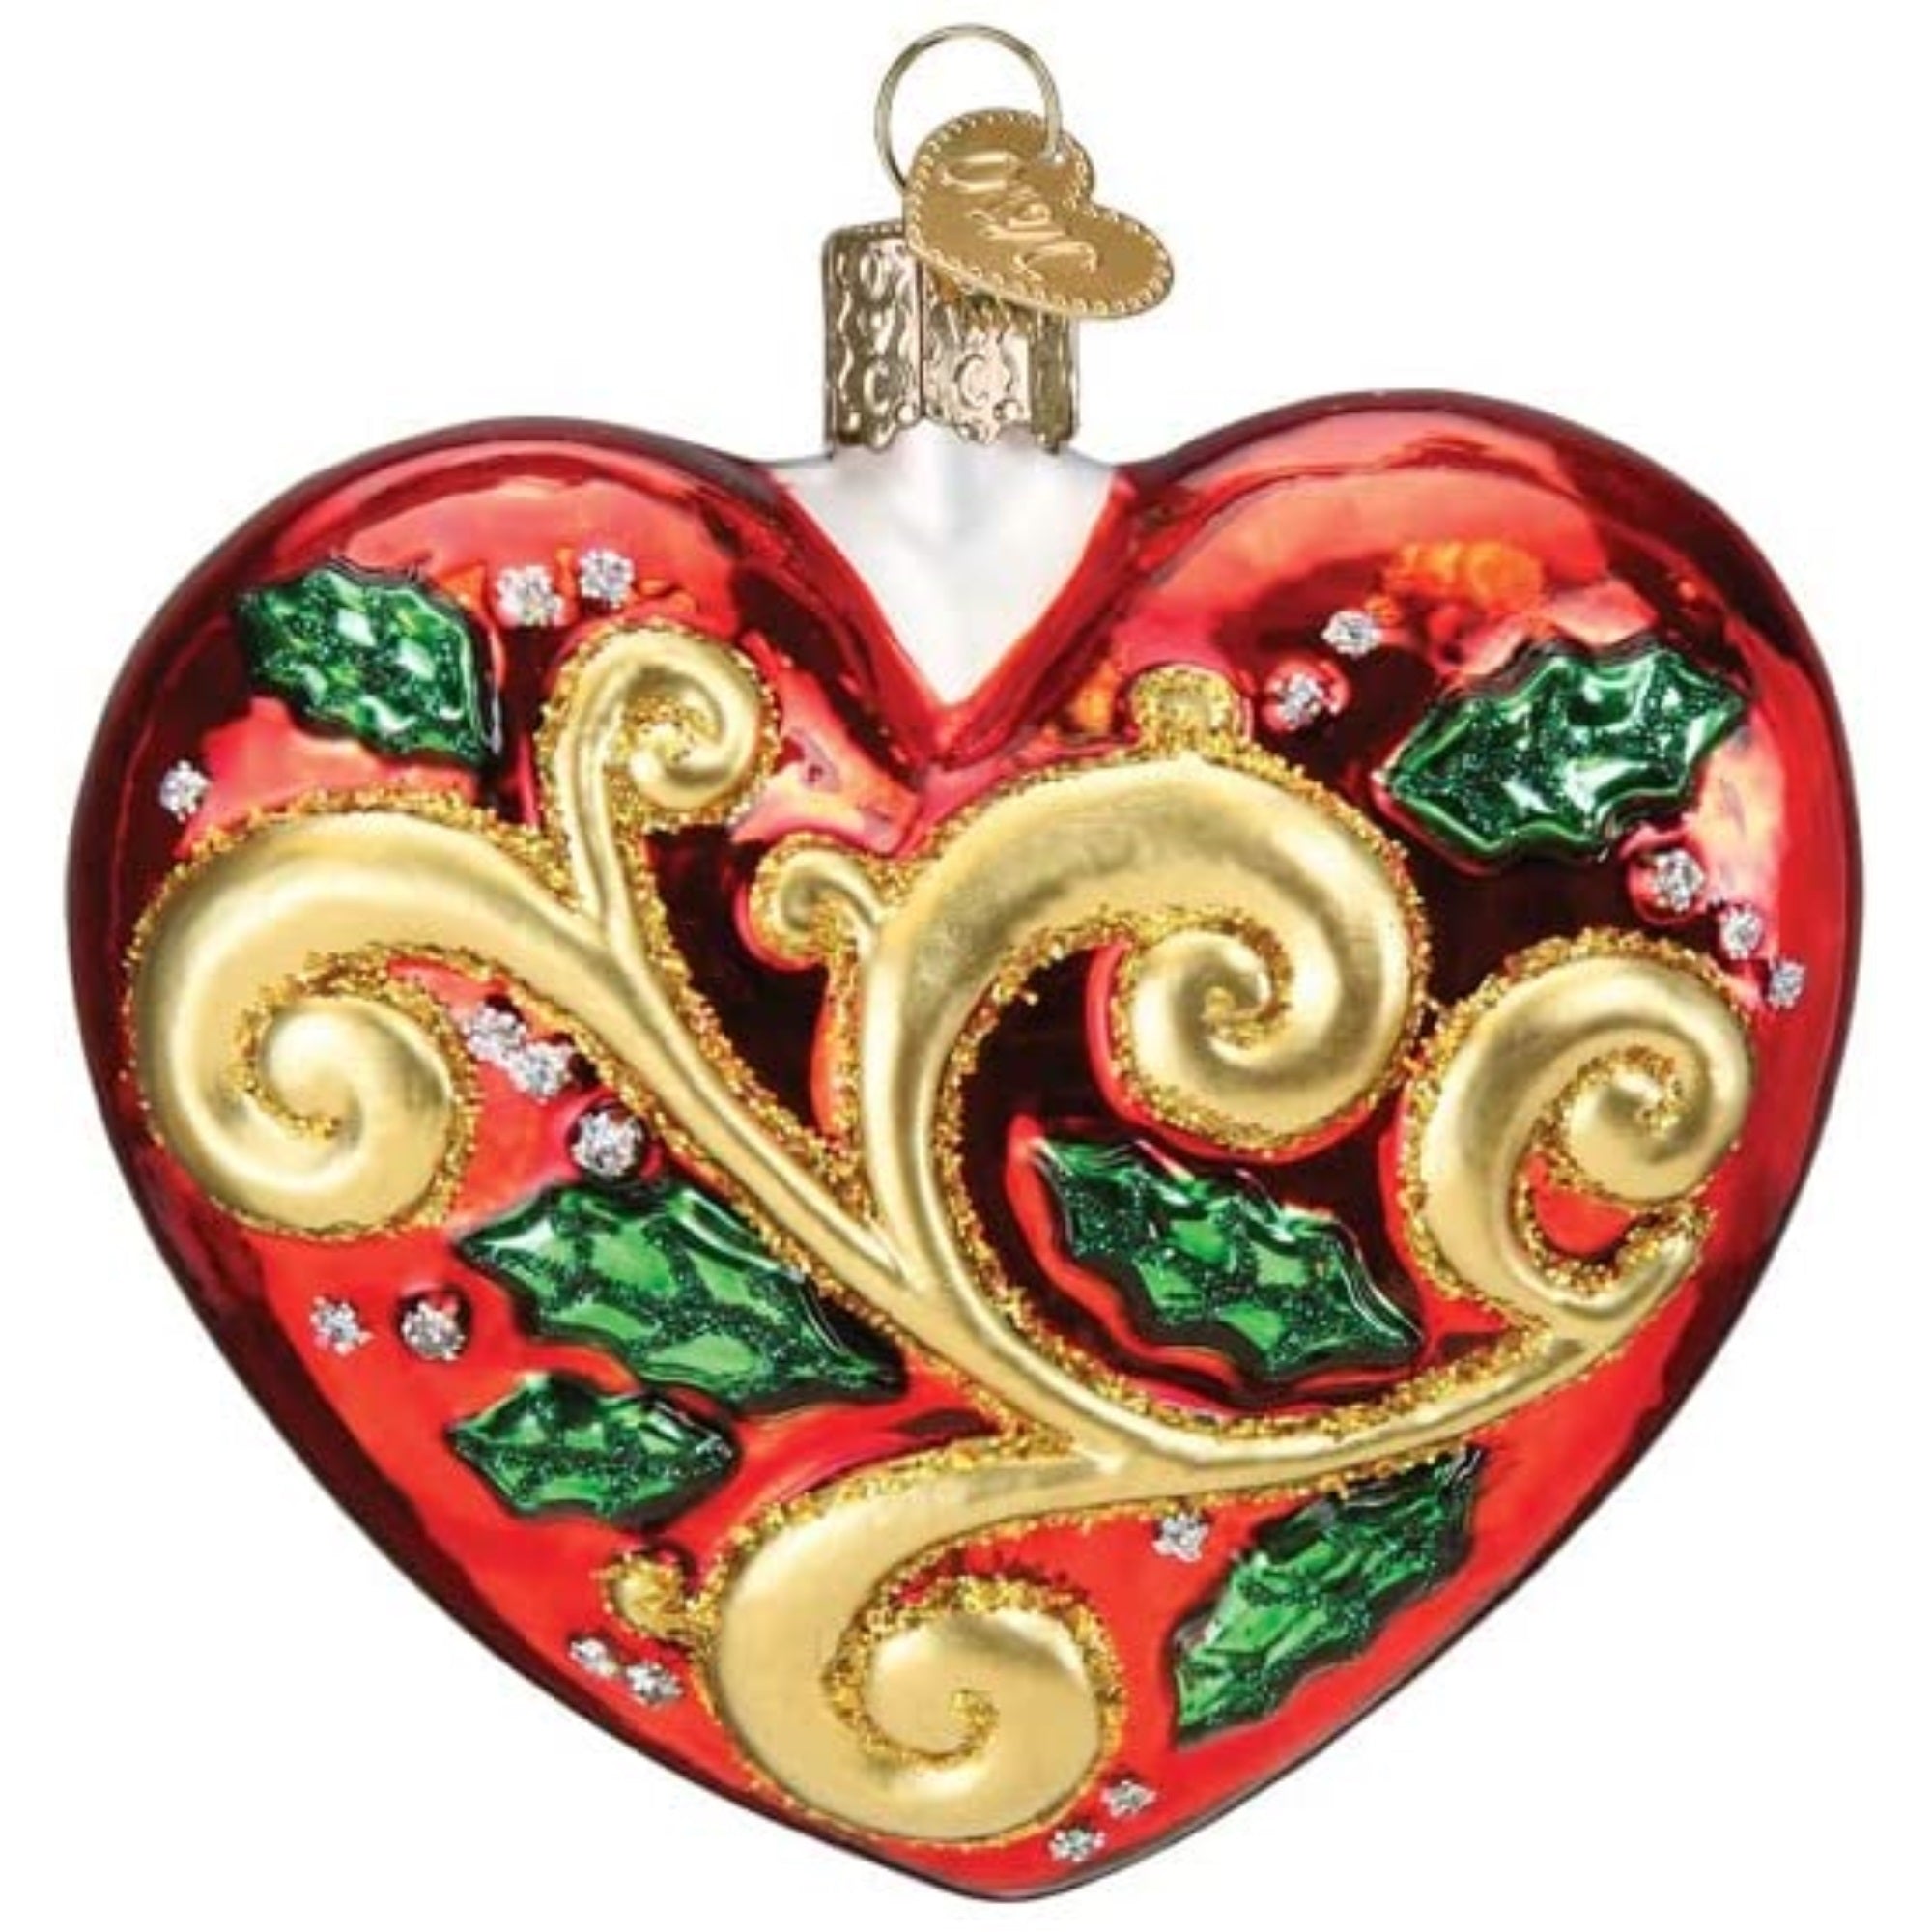 Old World Christmas 2022 First Christmas Heart Glass Blown Ornament